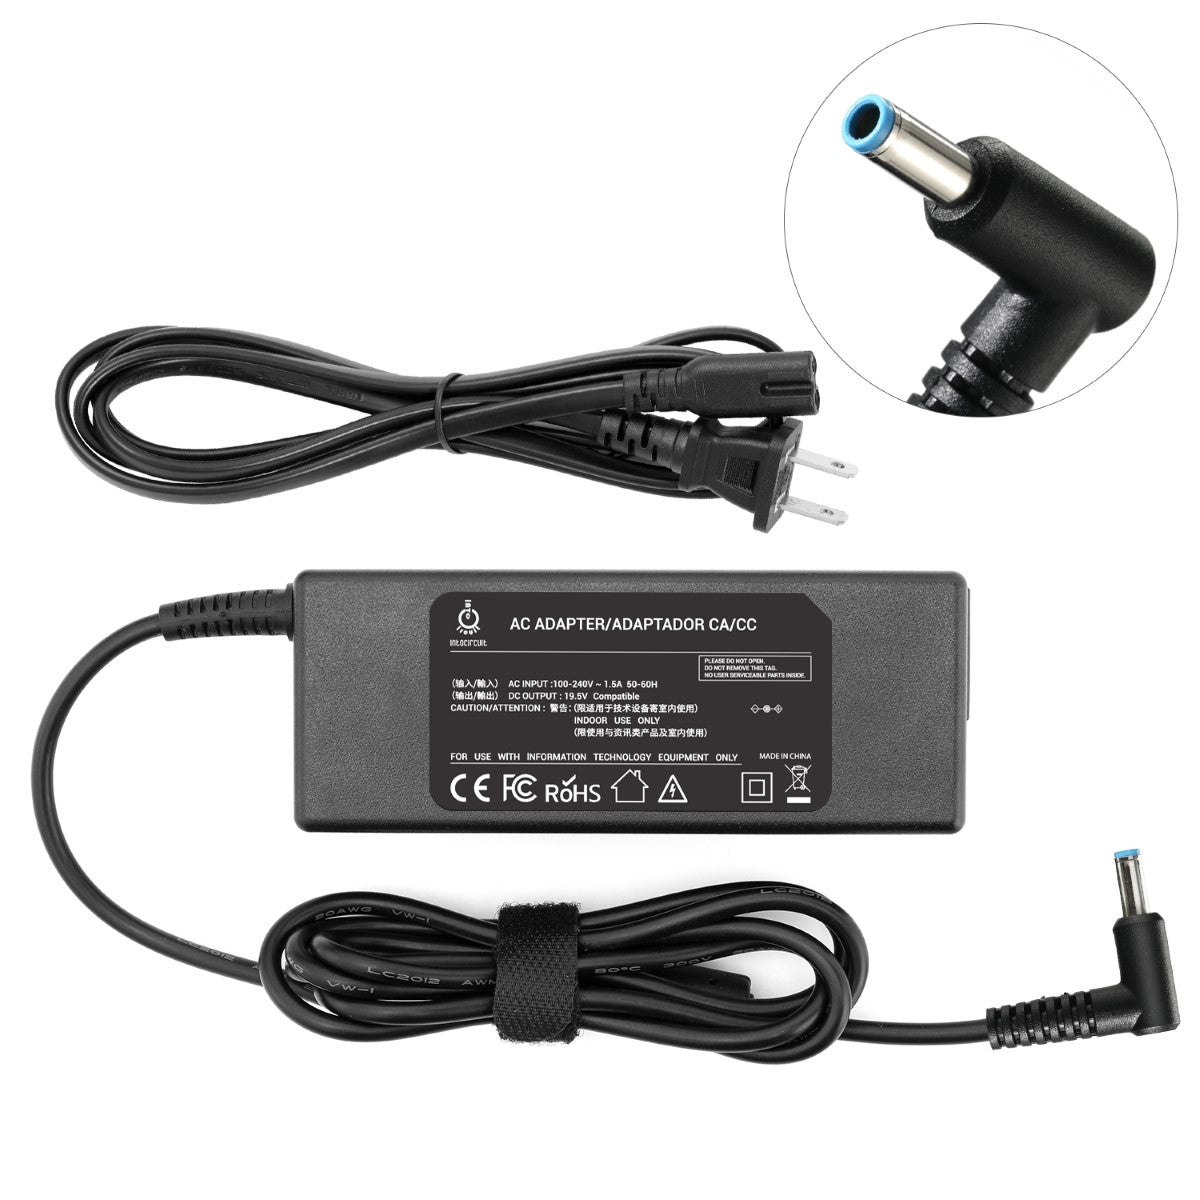 Charger for HP Pavilion 17-g161us Laptop